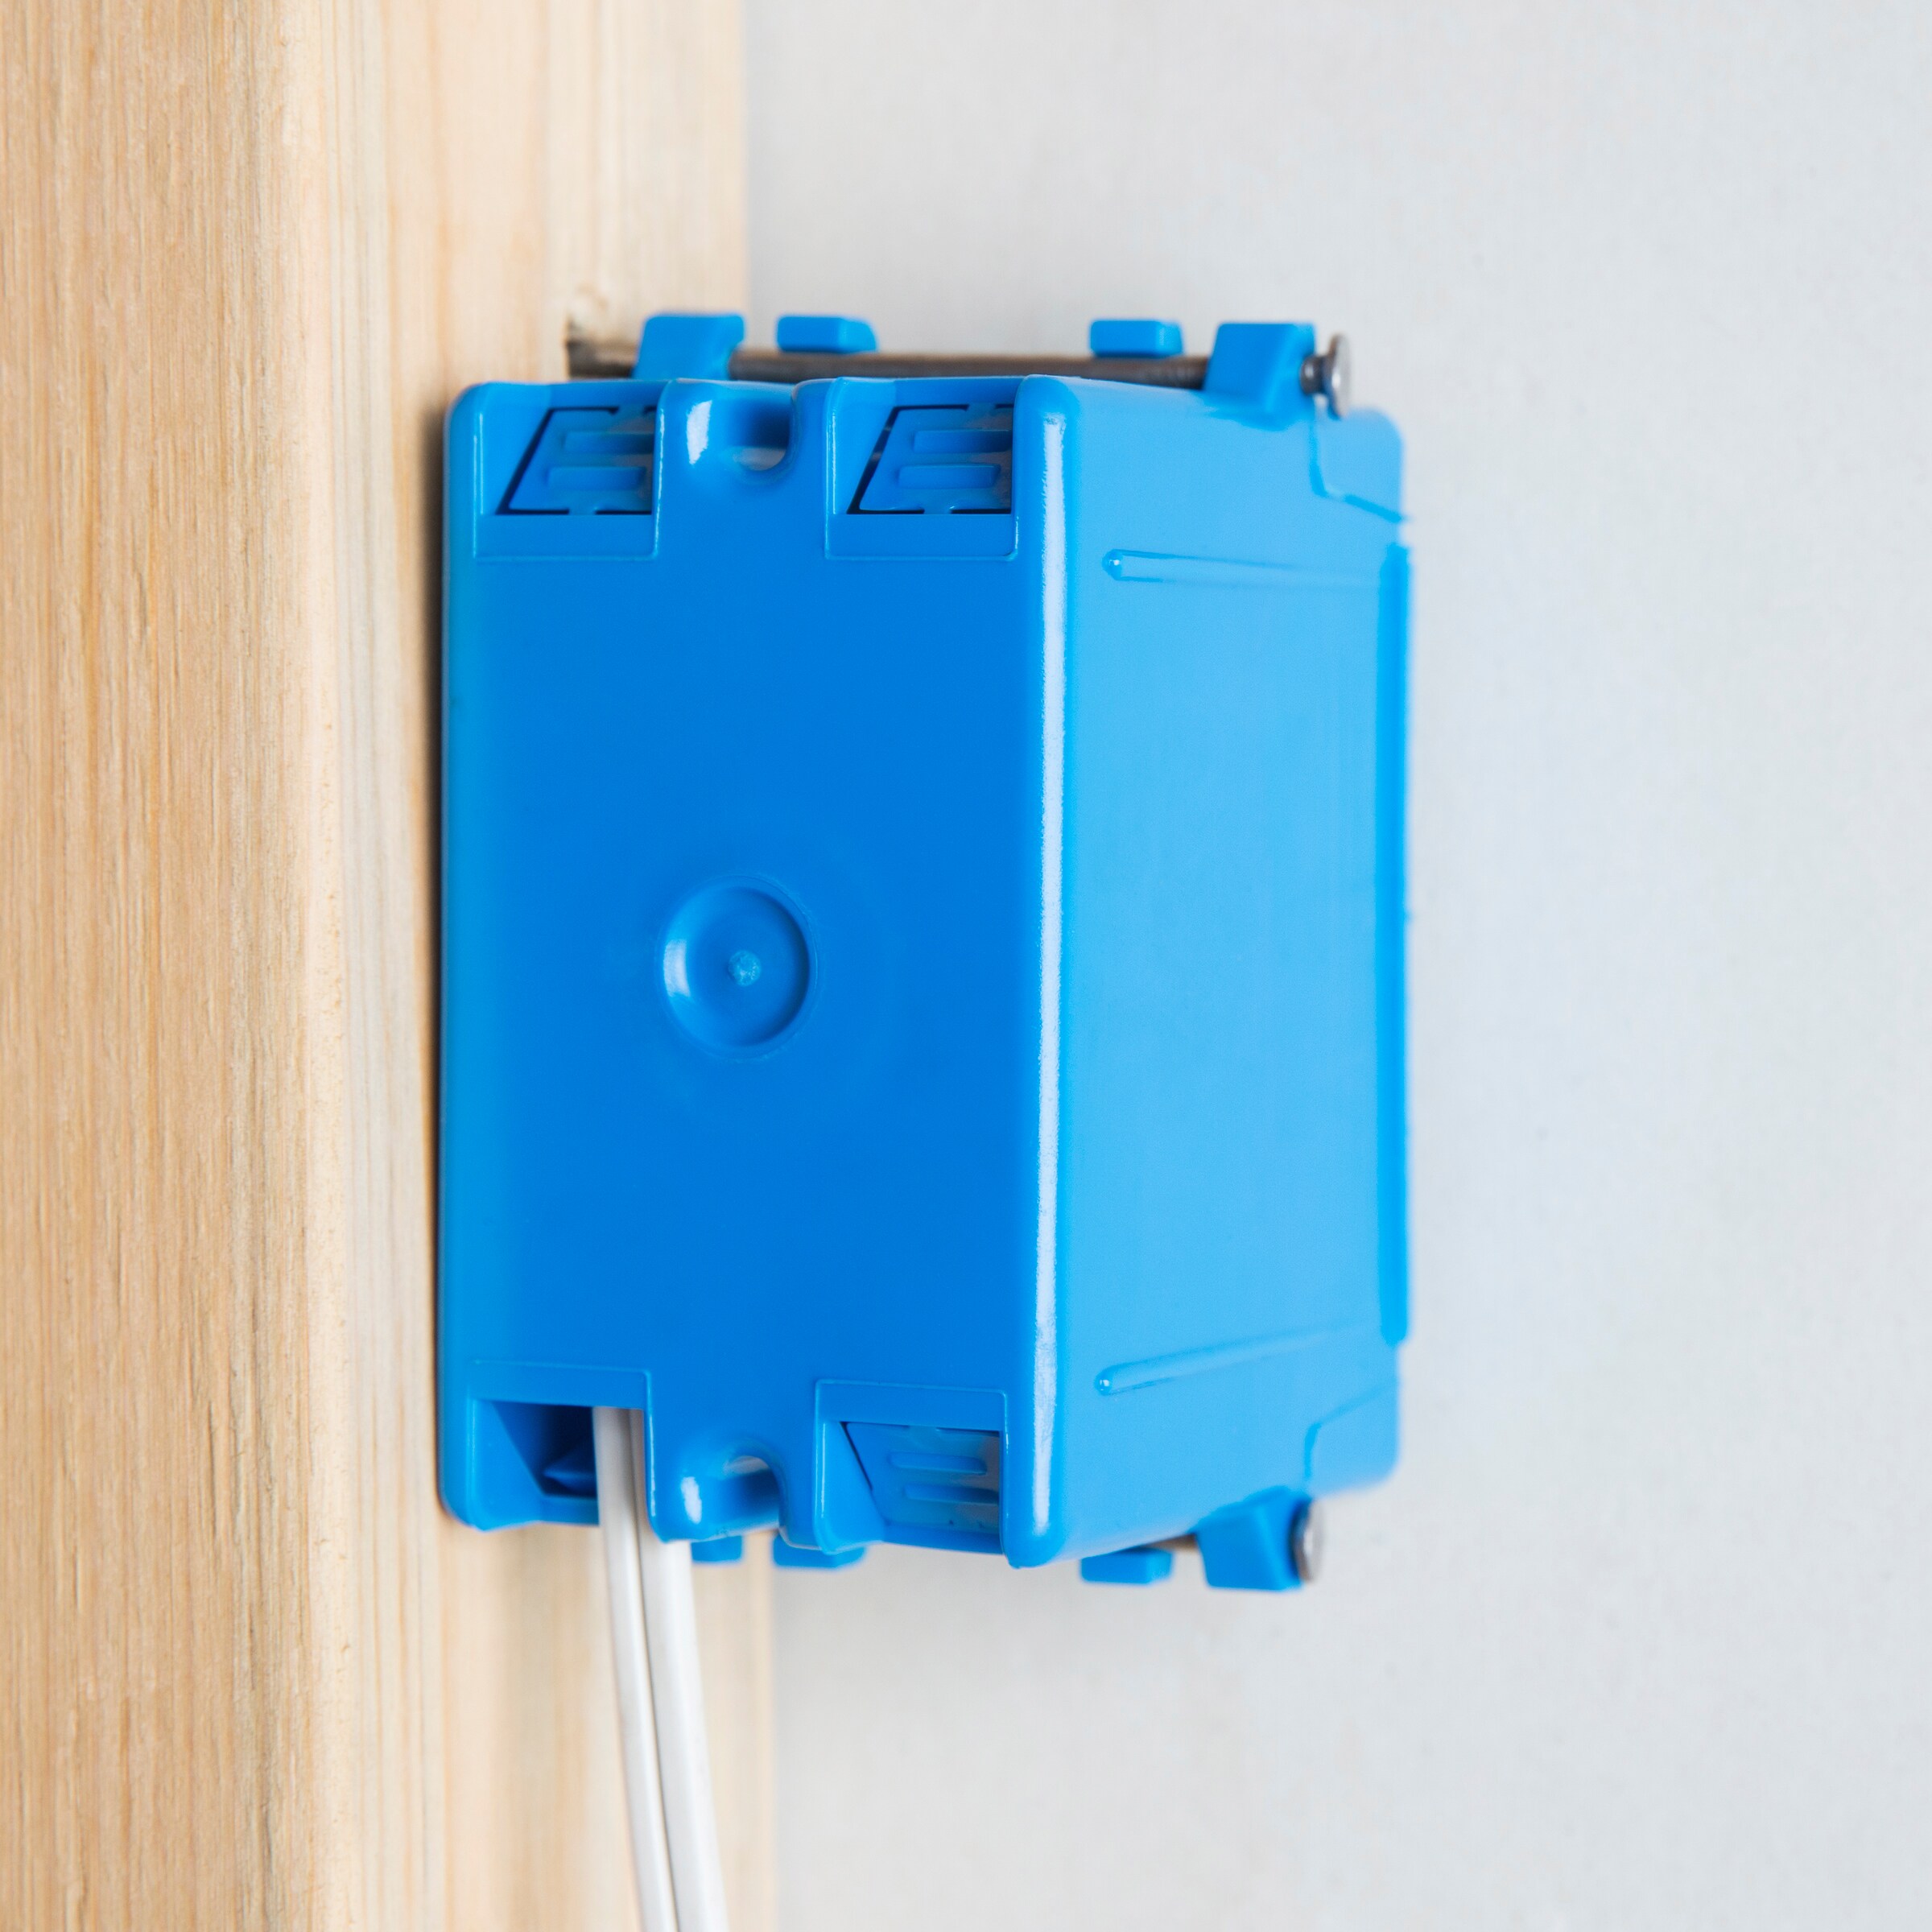 CARLON 1-Gang Blue Plastic New Work Standard Switch/Outlet Wall Electrical  Box at